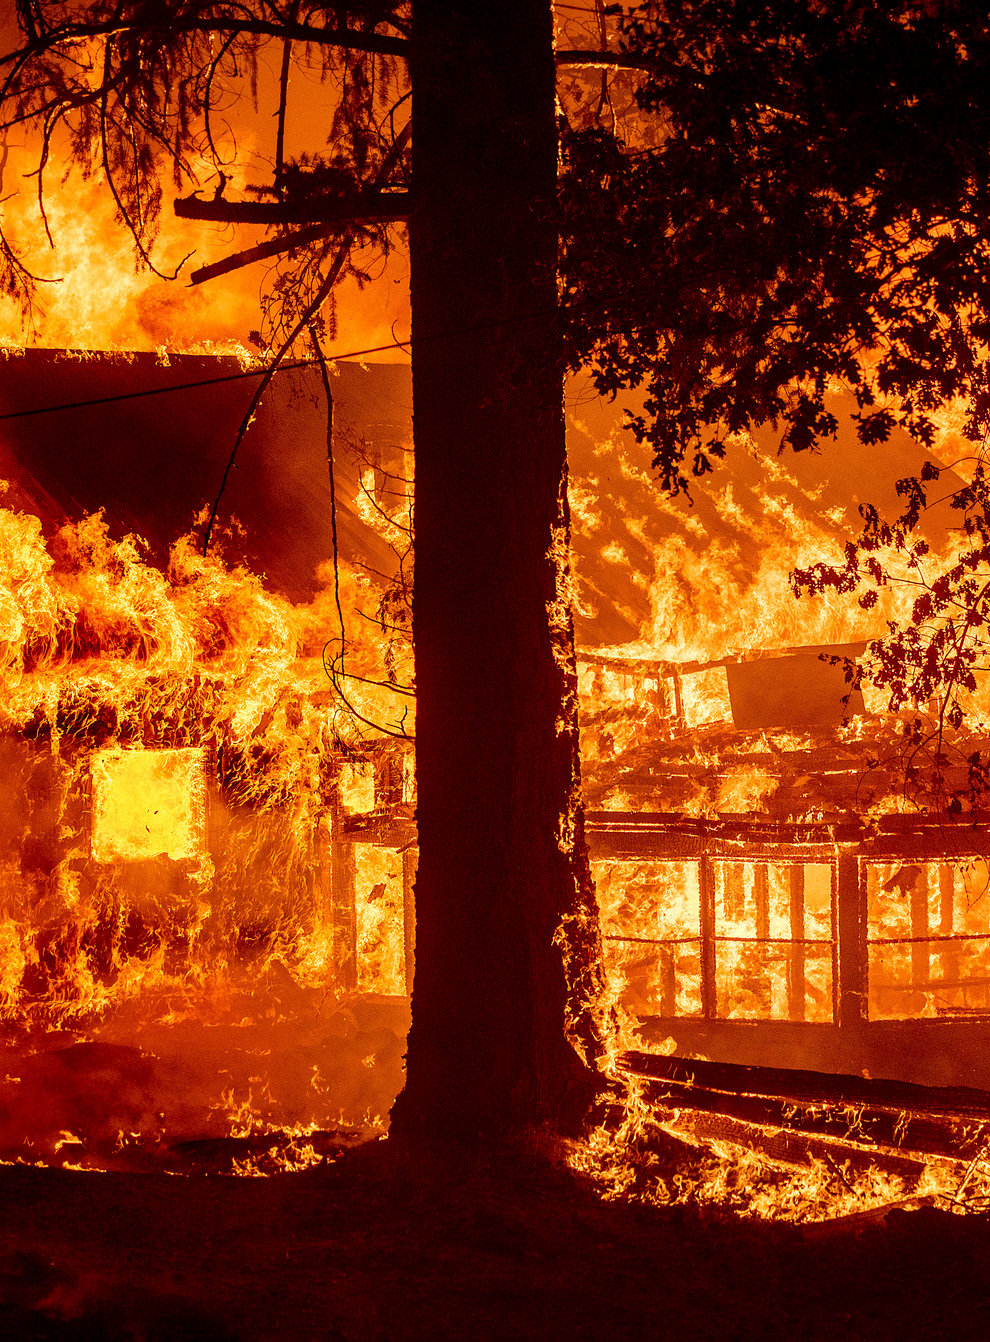 Flames from the Dixie fire consume a home in the Indian Falls community of Plumas County, California (Noah Berger/AP)